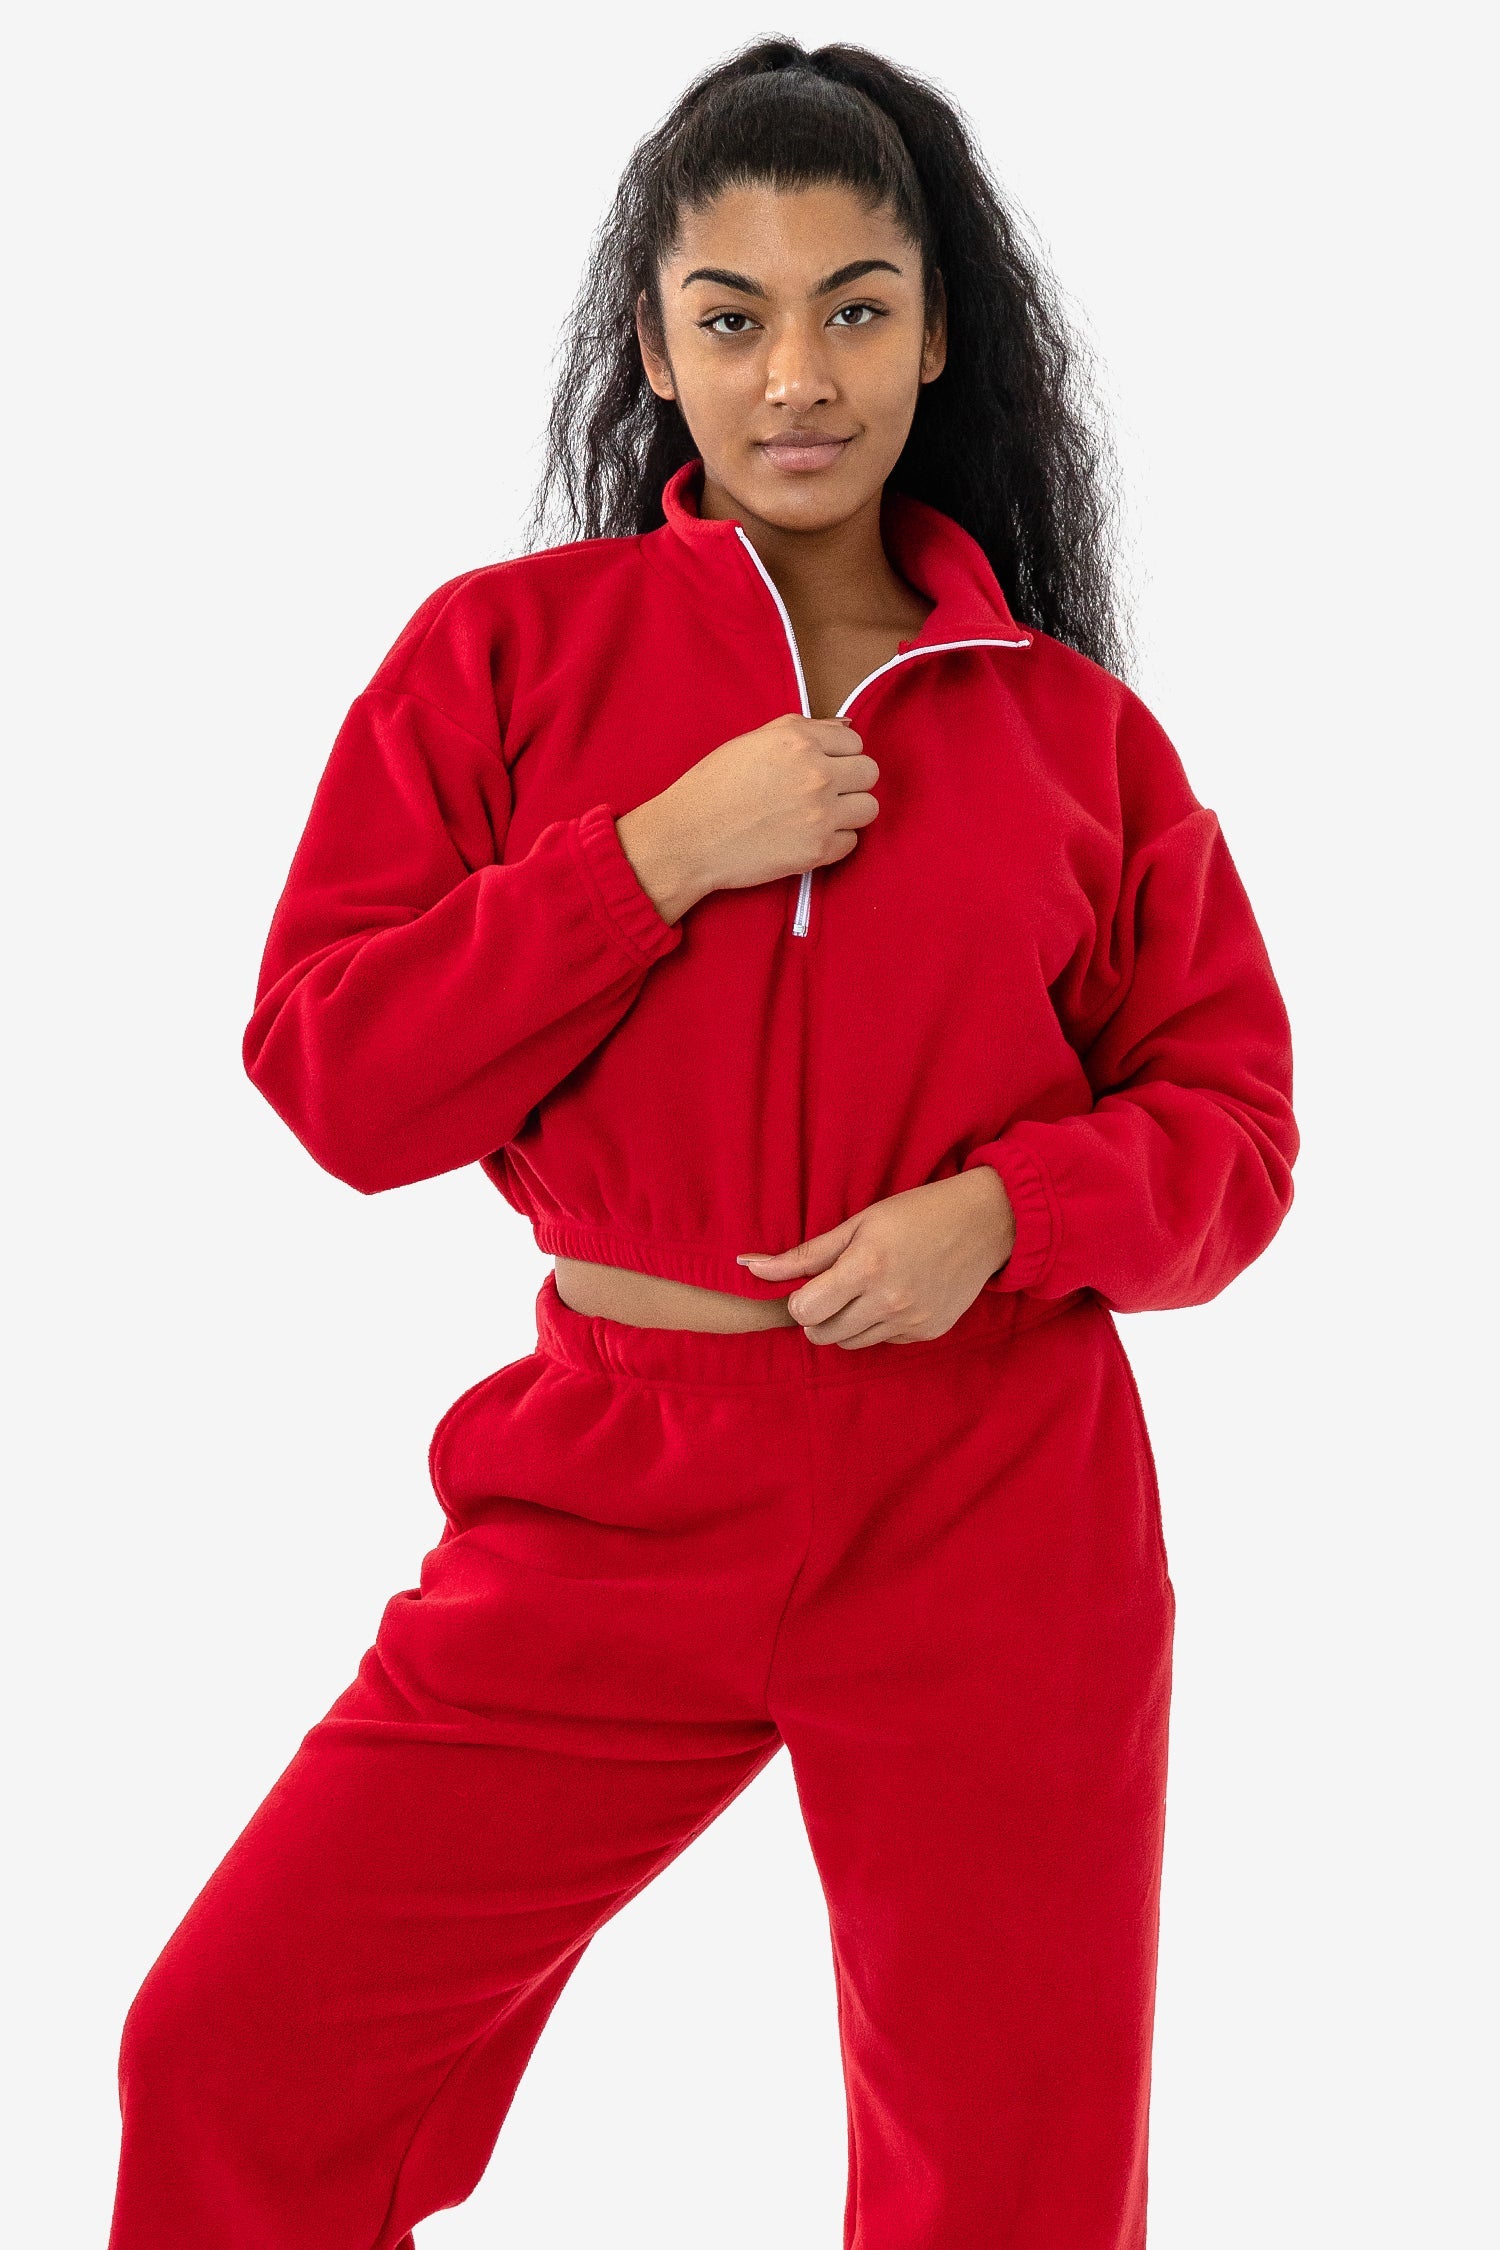 Women's Casual Athleisure Matching Sweatsuit Polar Fleece Quarter Zip  Thermal Lined Pullover Sweatshirt And Beam Feet Pants Set In DEEP RED